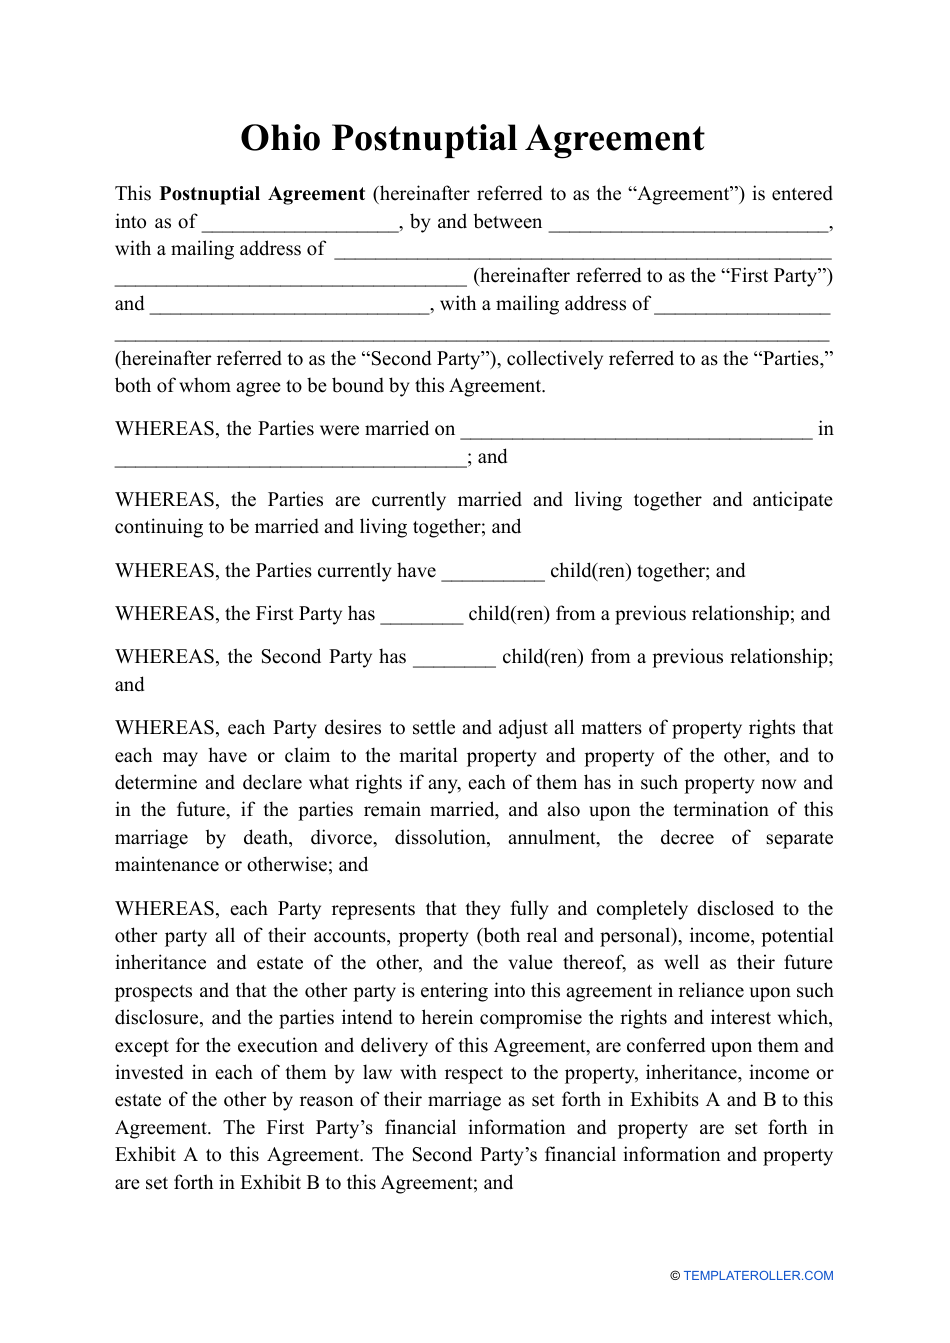 Postnuptial Agreement Template - Ohio, Page 1